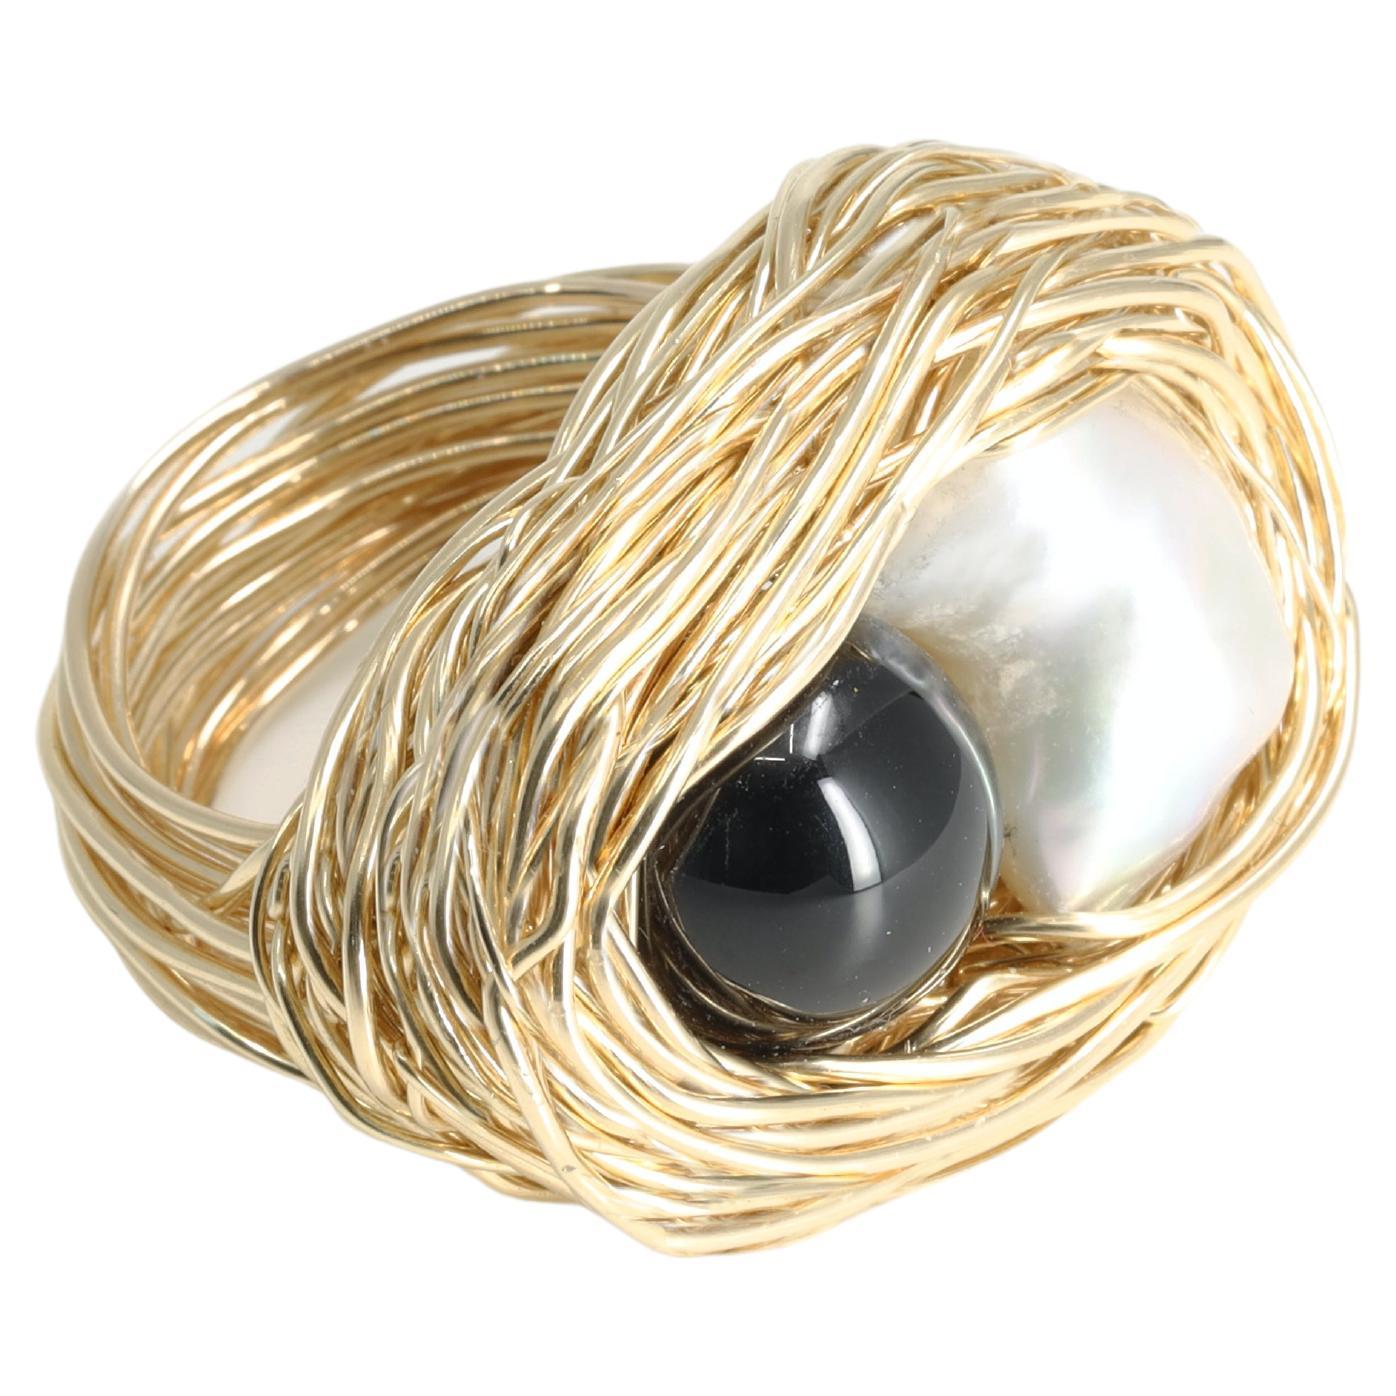 Pearl & Onyx in 14 Kt Gold F One-Off Cocktail Statement Ring by the Artist